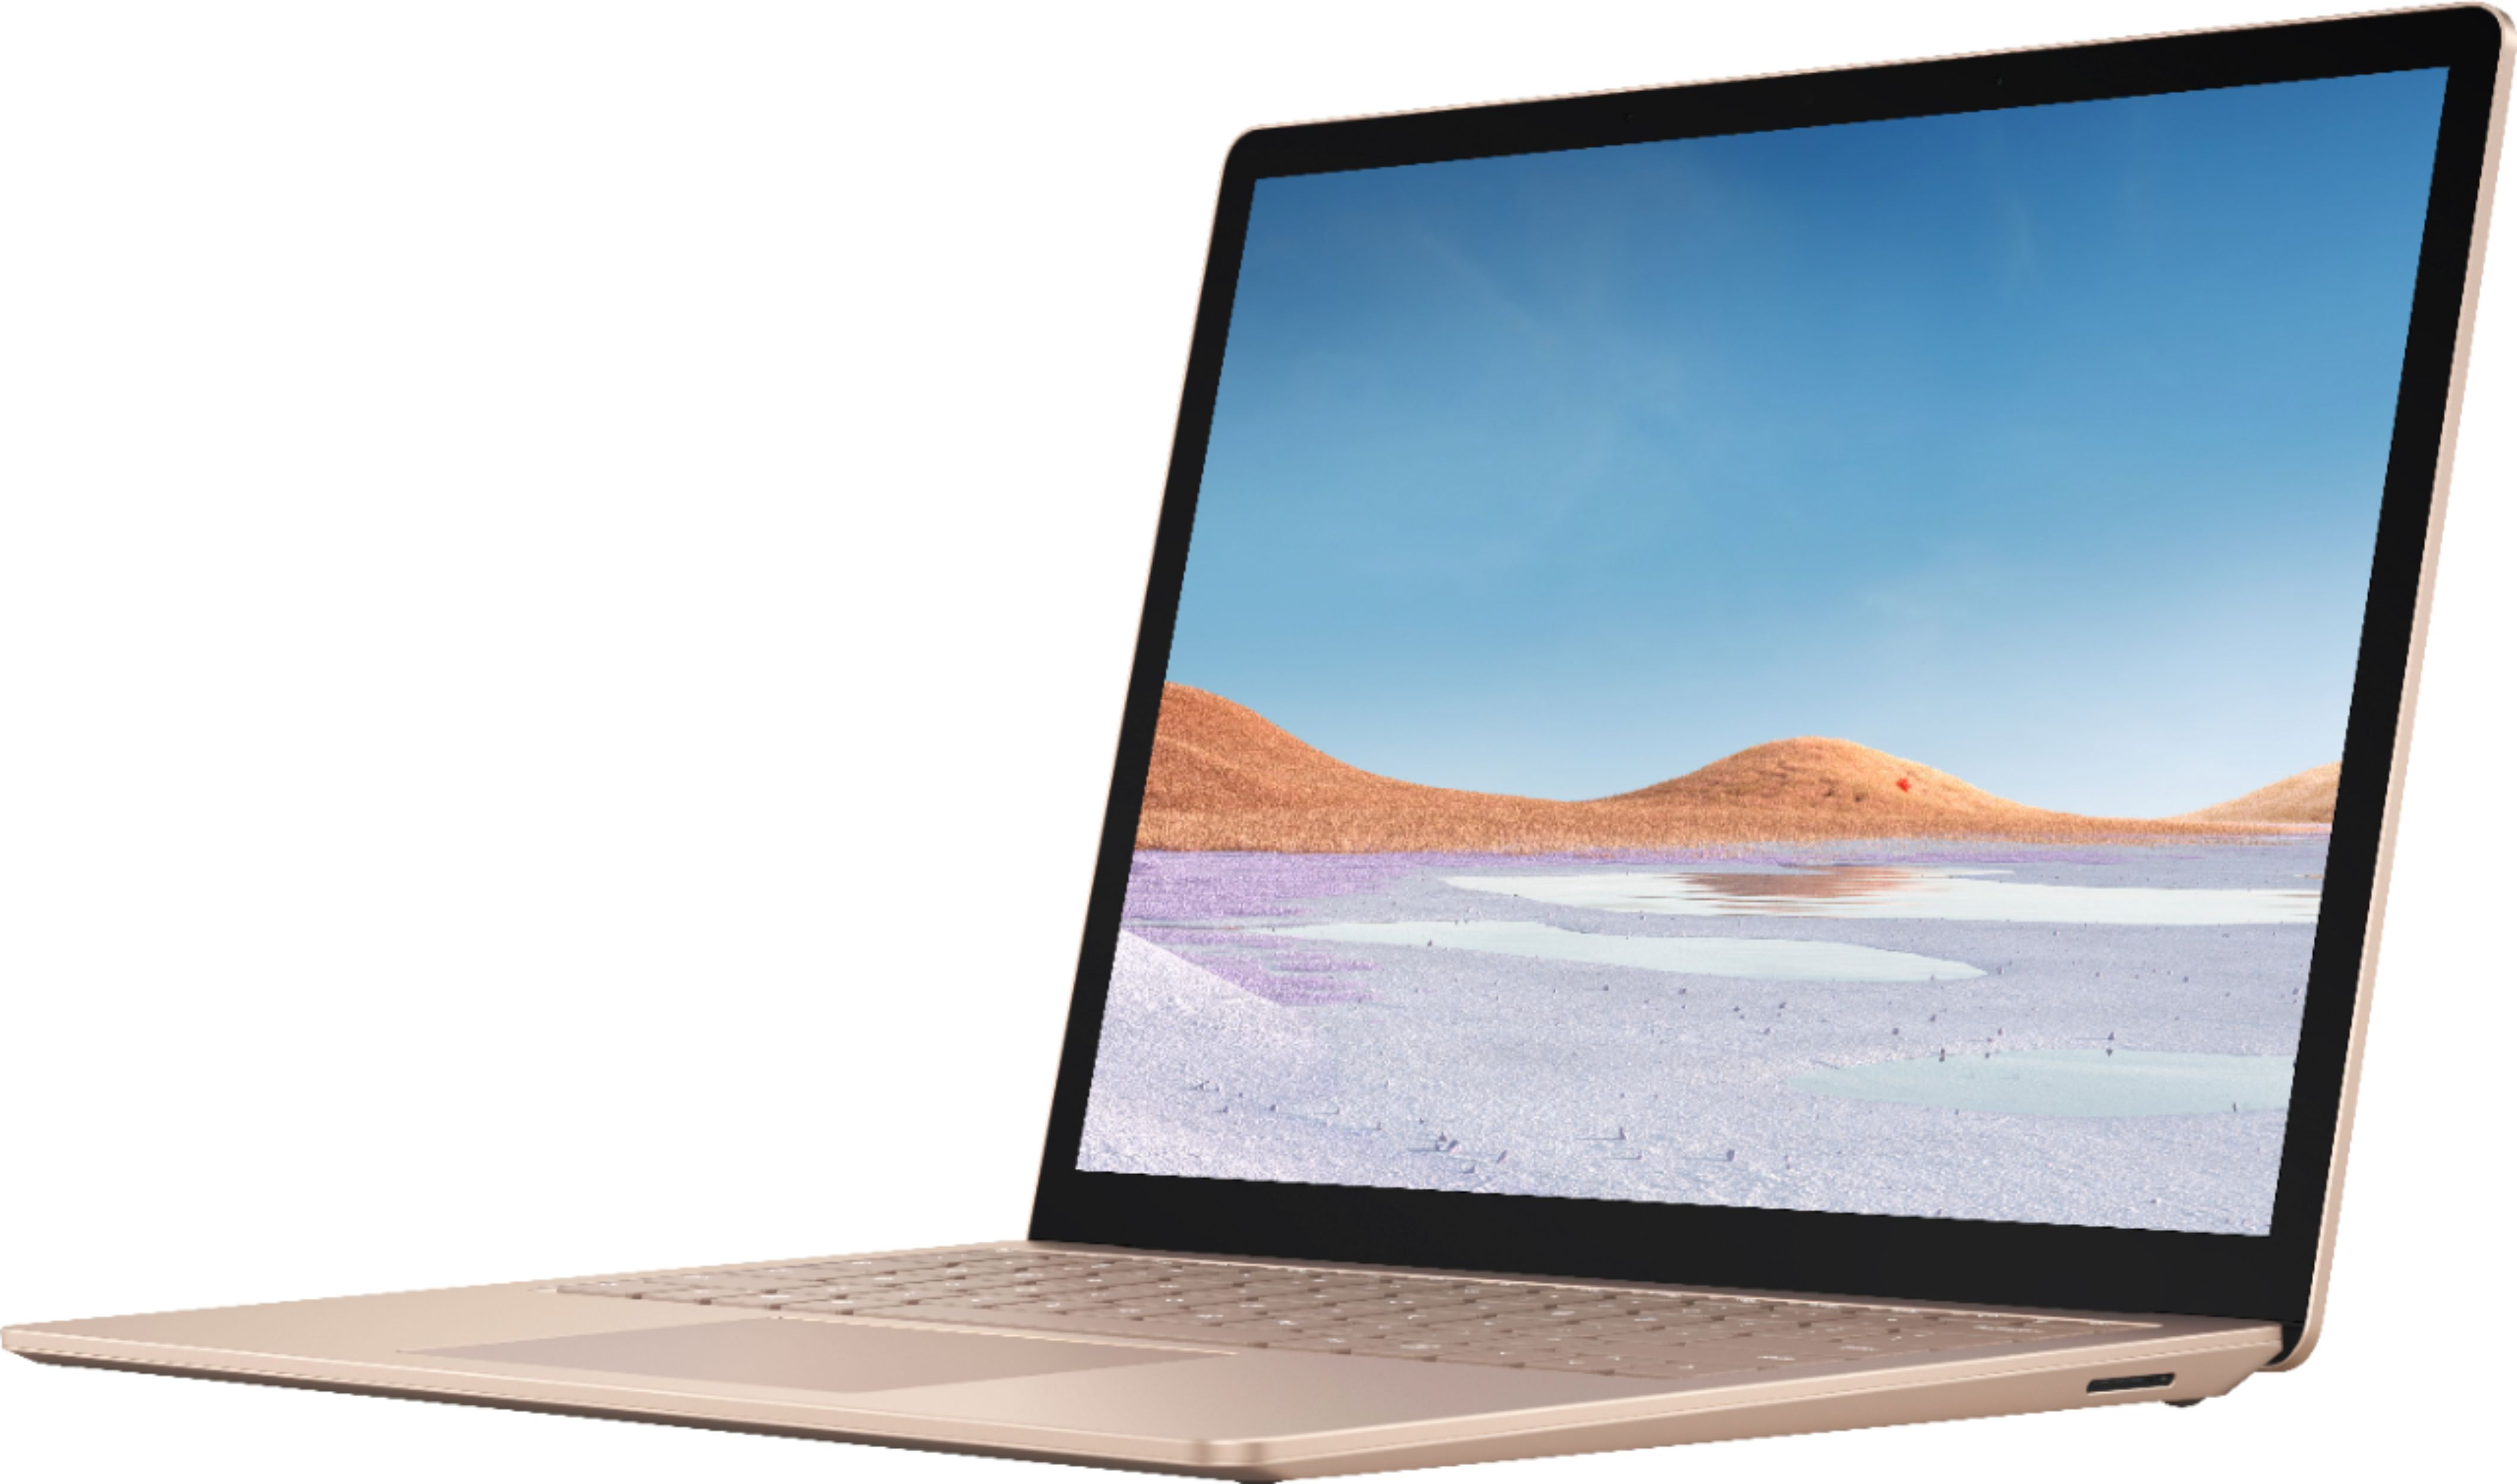 Surface Laptop3 13.5 Price 899.99 after $400 Discount